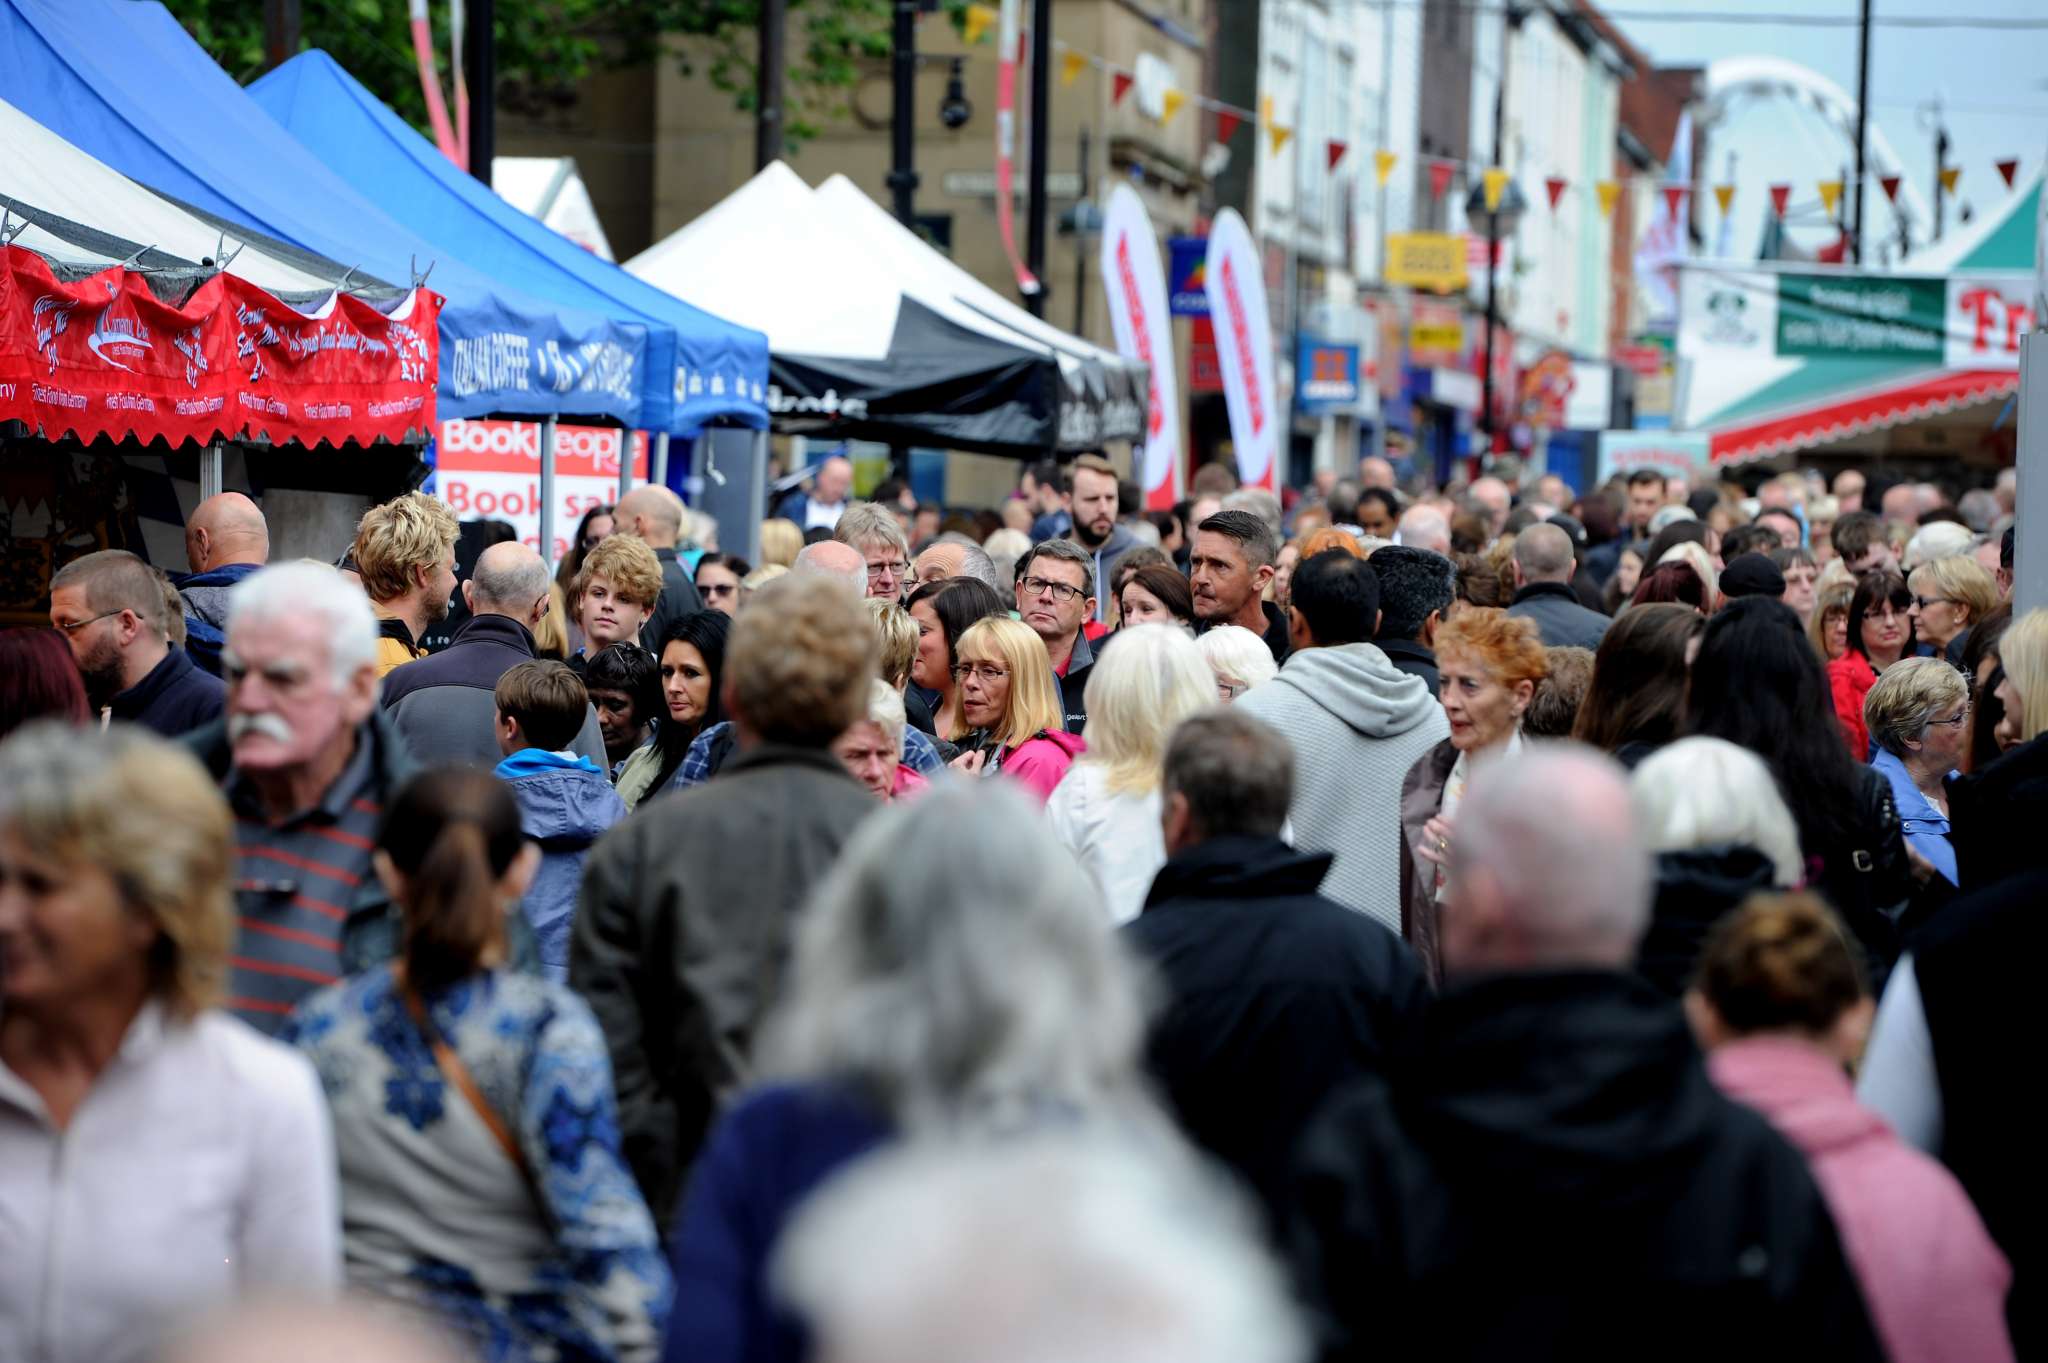 The 10th annual Bolton Food and Drink Festival, Victoria Square, Bolton, Lancashire. Record crowds attended the four day event. Picture by Paul Heyes, Monday August 31, 2015.